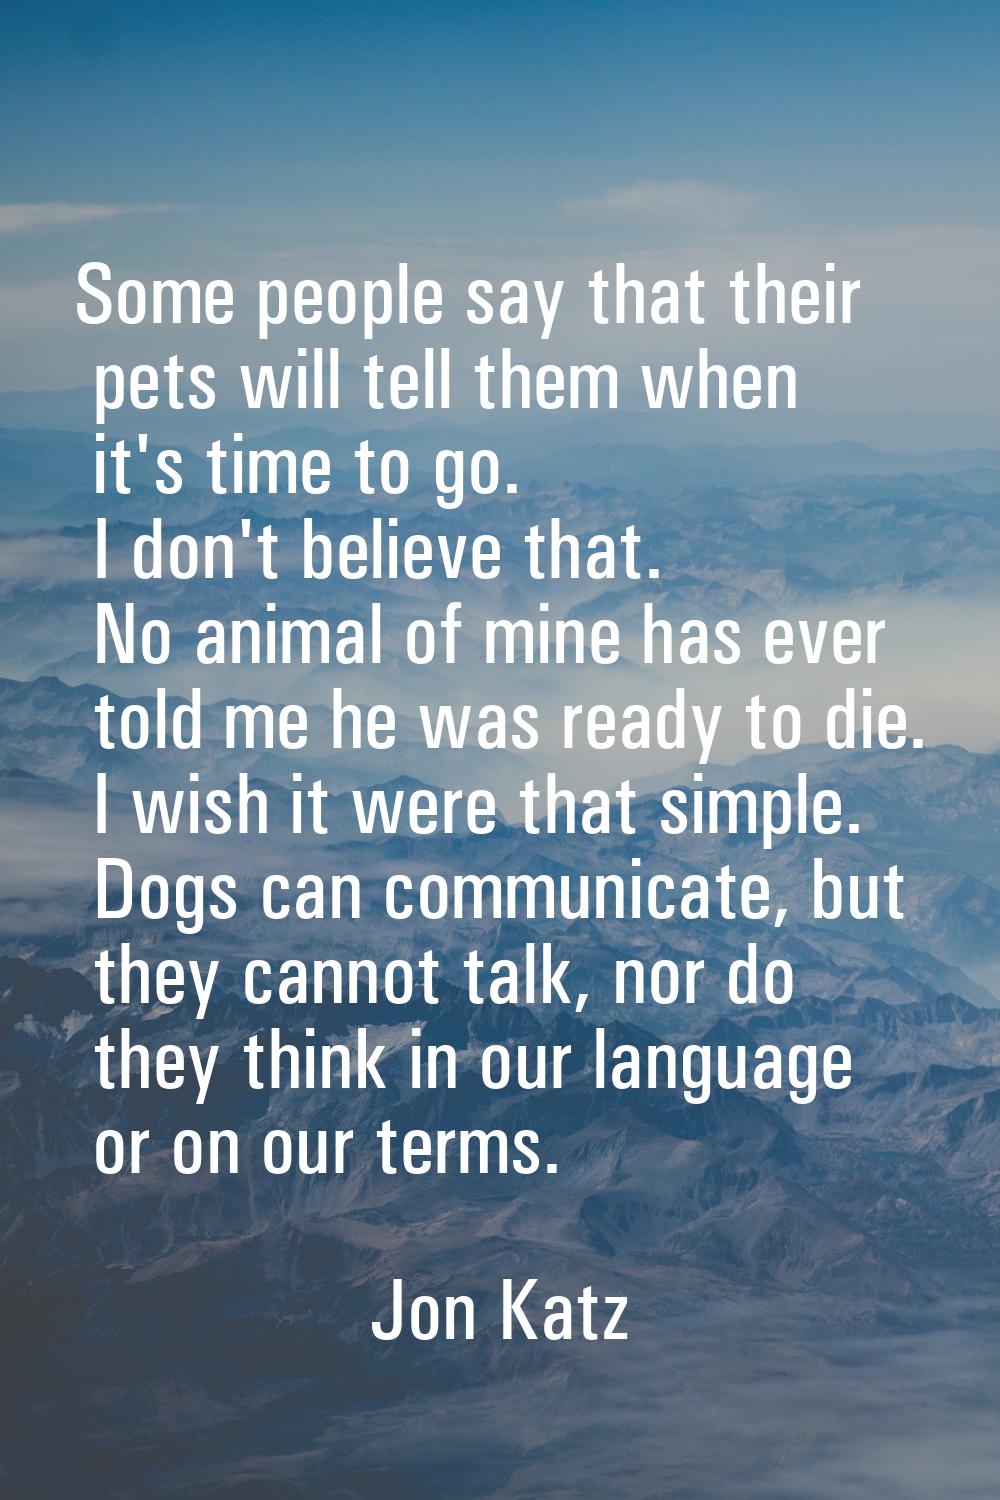 Some people say that their pets will tell them when it's time to go. I don't believe that. No anima